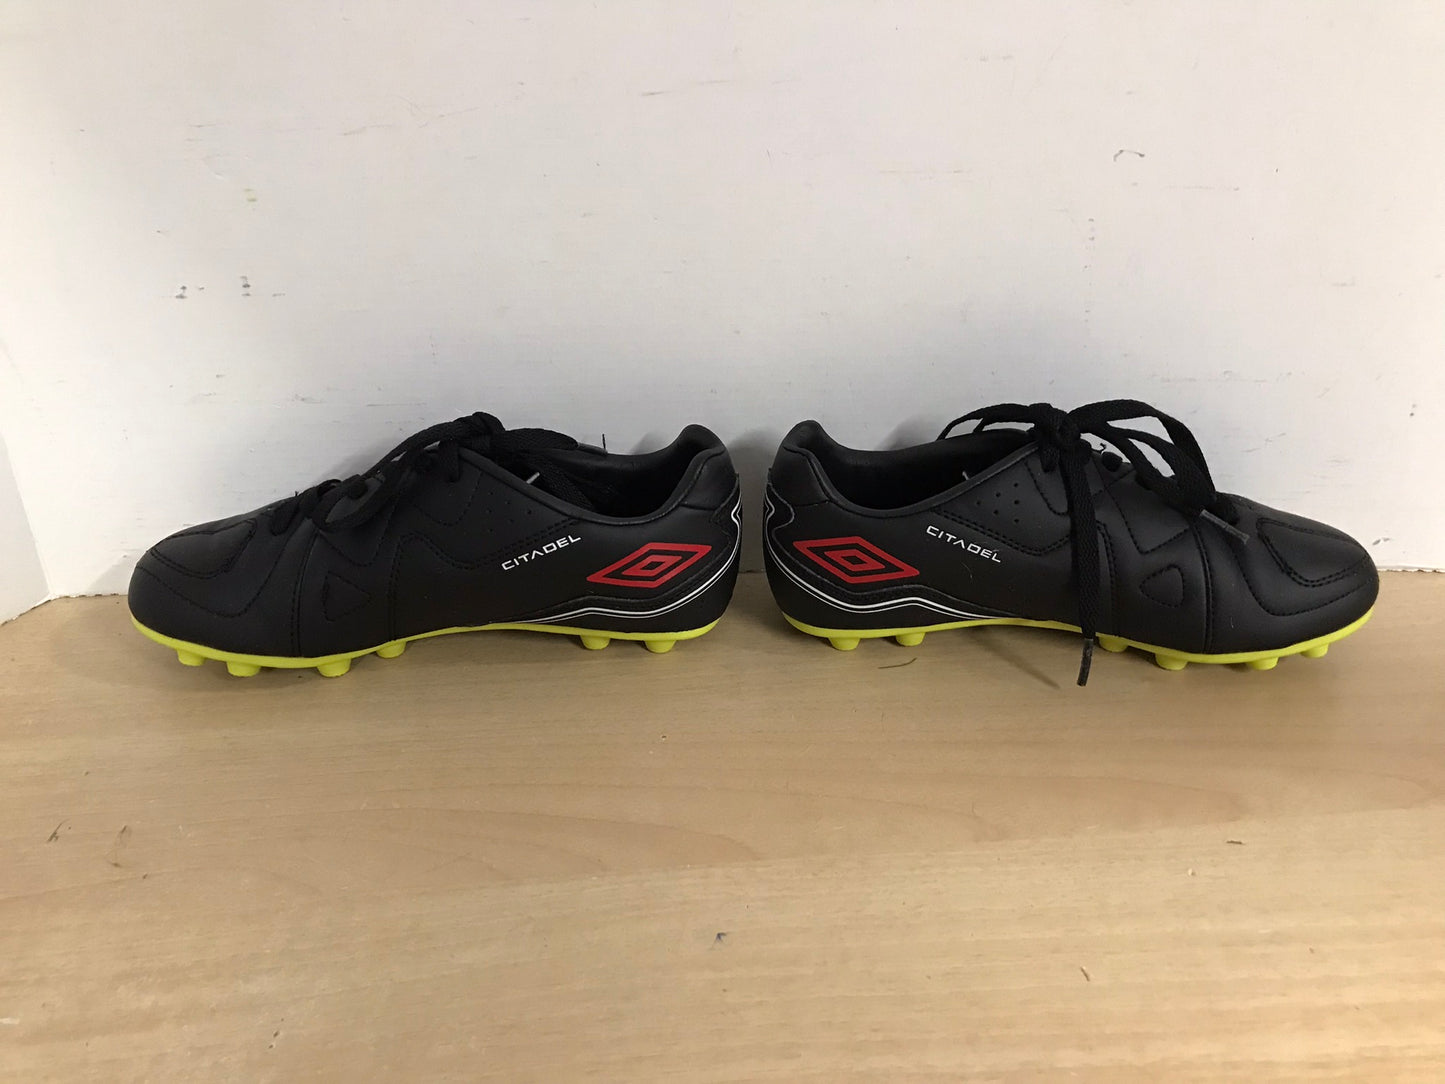 Soccer Shoes Cleats Child Size 2 Umbro Black Red Lime Excellent